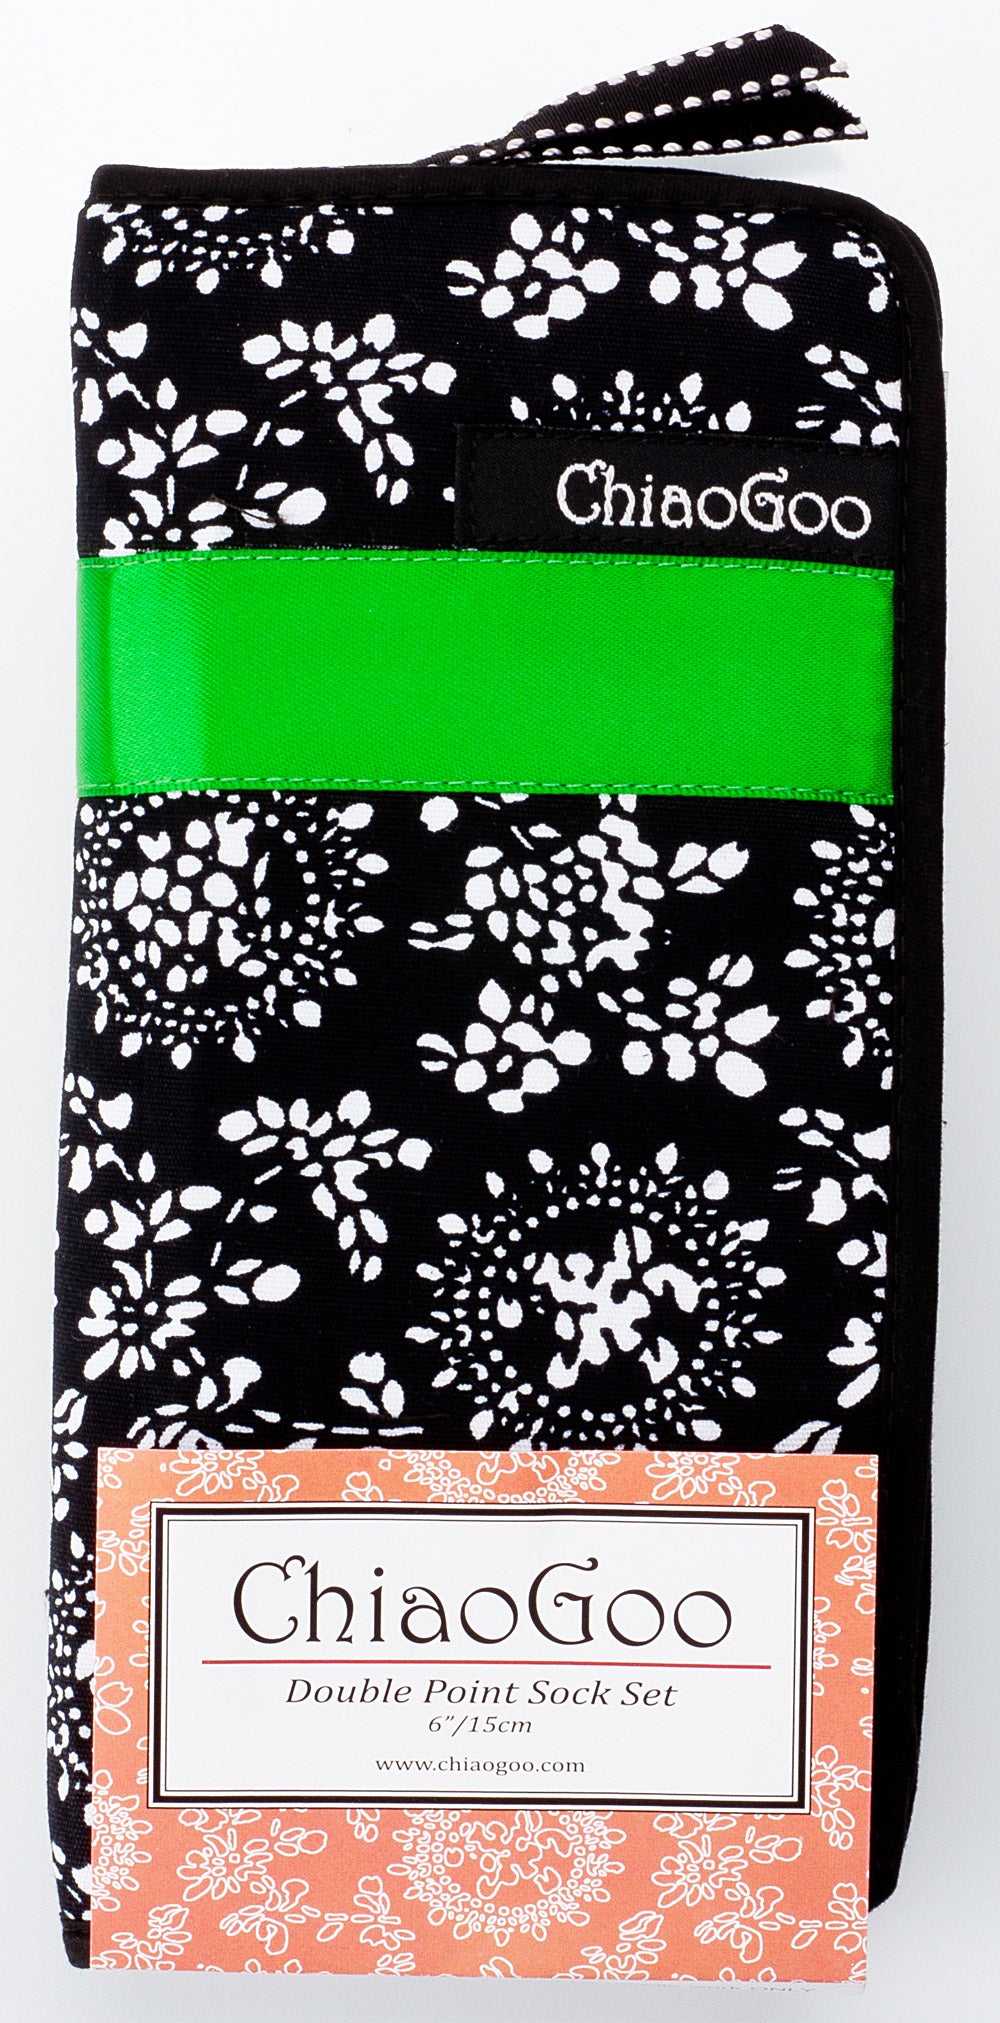 ChiaoGoo Bamboo Double Point 6 Inch (15 cm) Sock Set 5 Sizes US 1 (2.25 mm) - US-3 (3.25 mm)